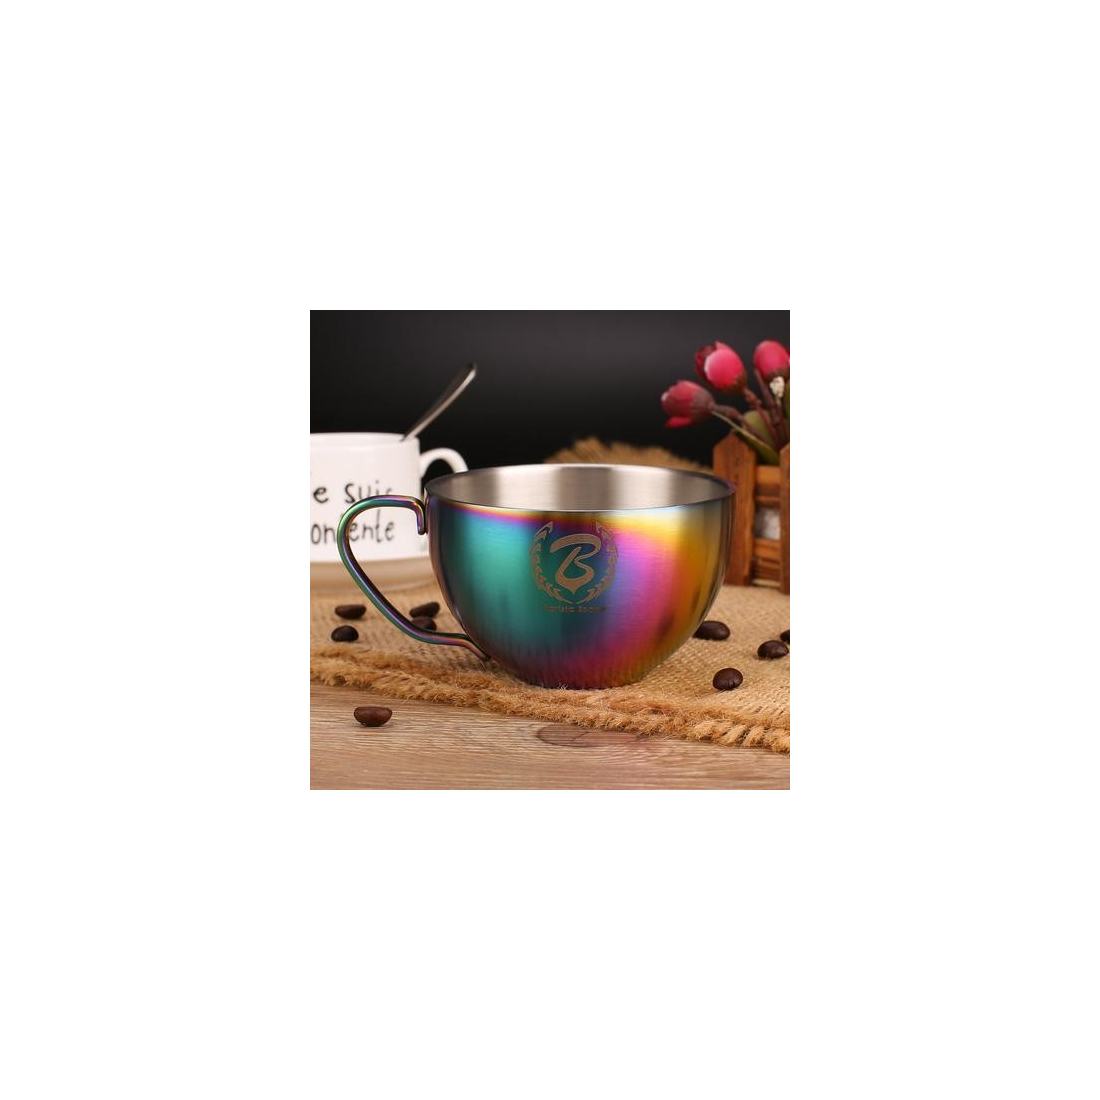 Barista space (CC11) Stainless Steel Multicolor 250ml Cafe Latte Art Cup|mkayn|مكاين